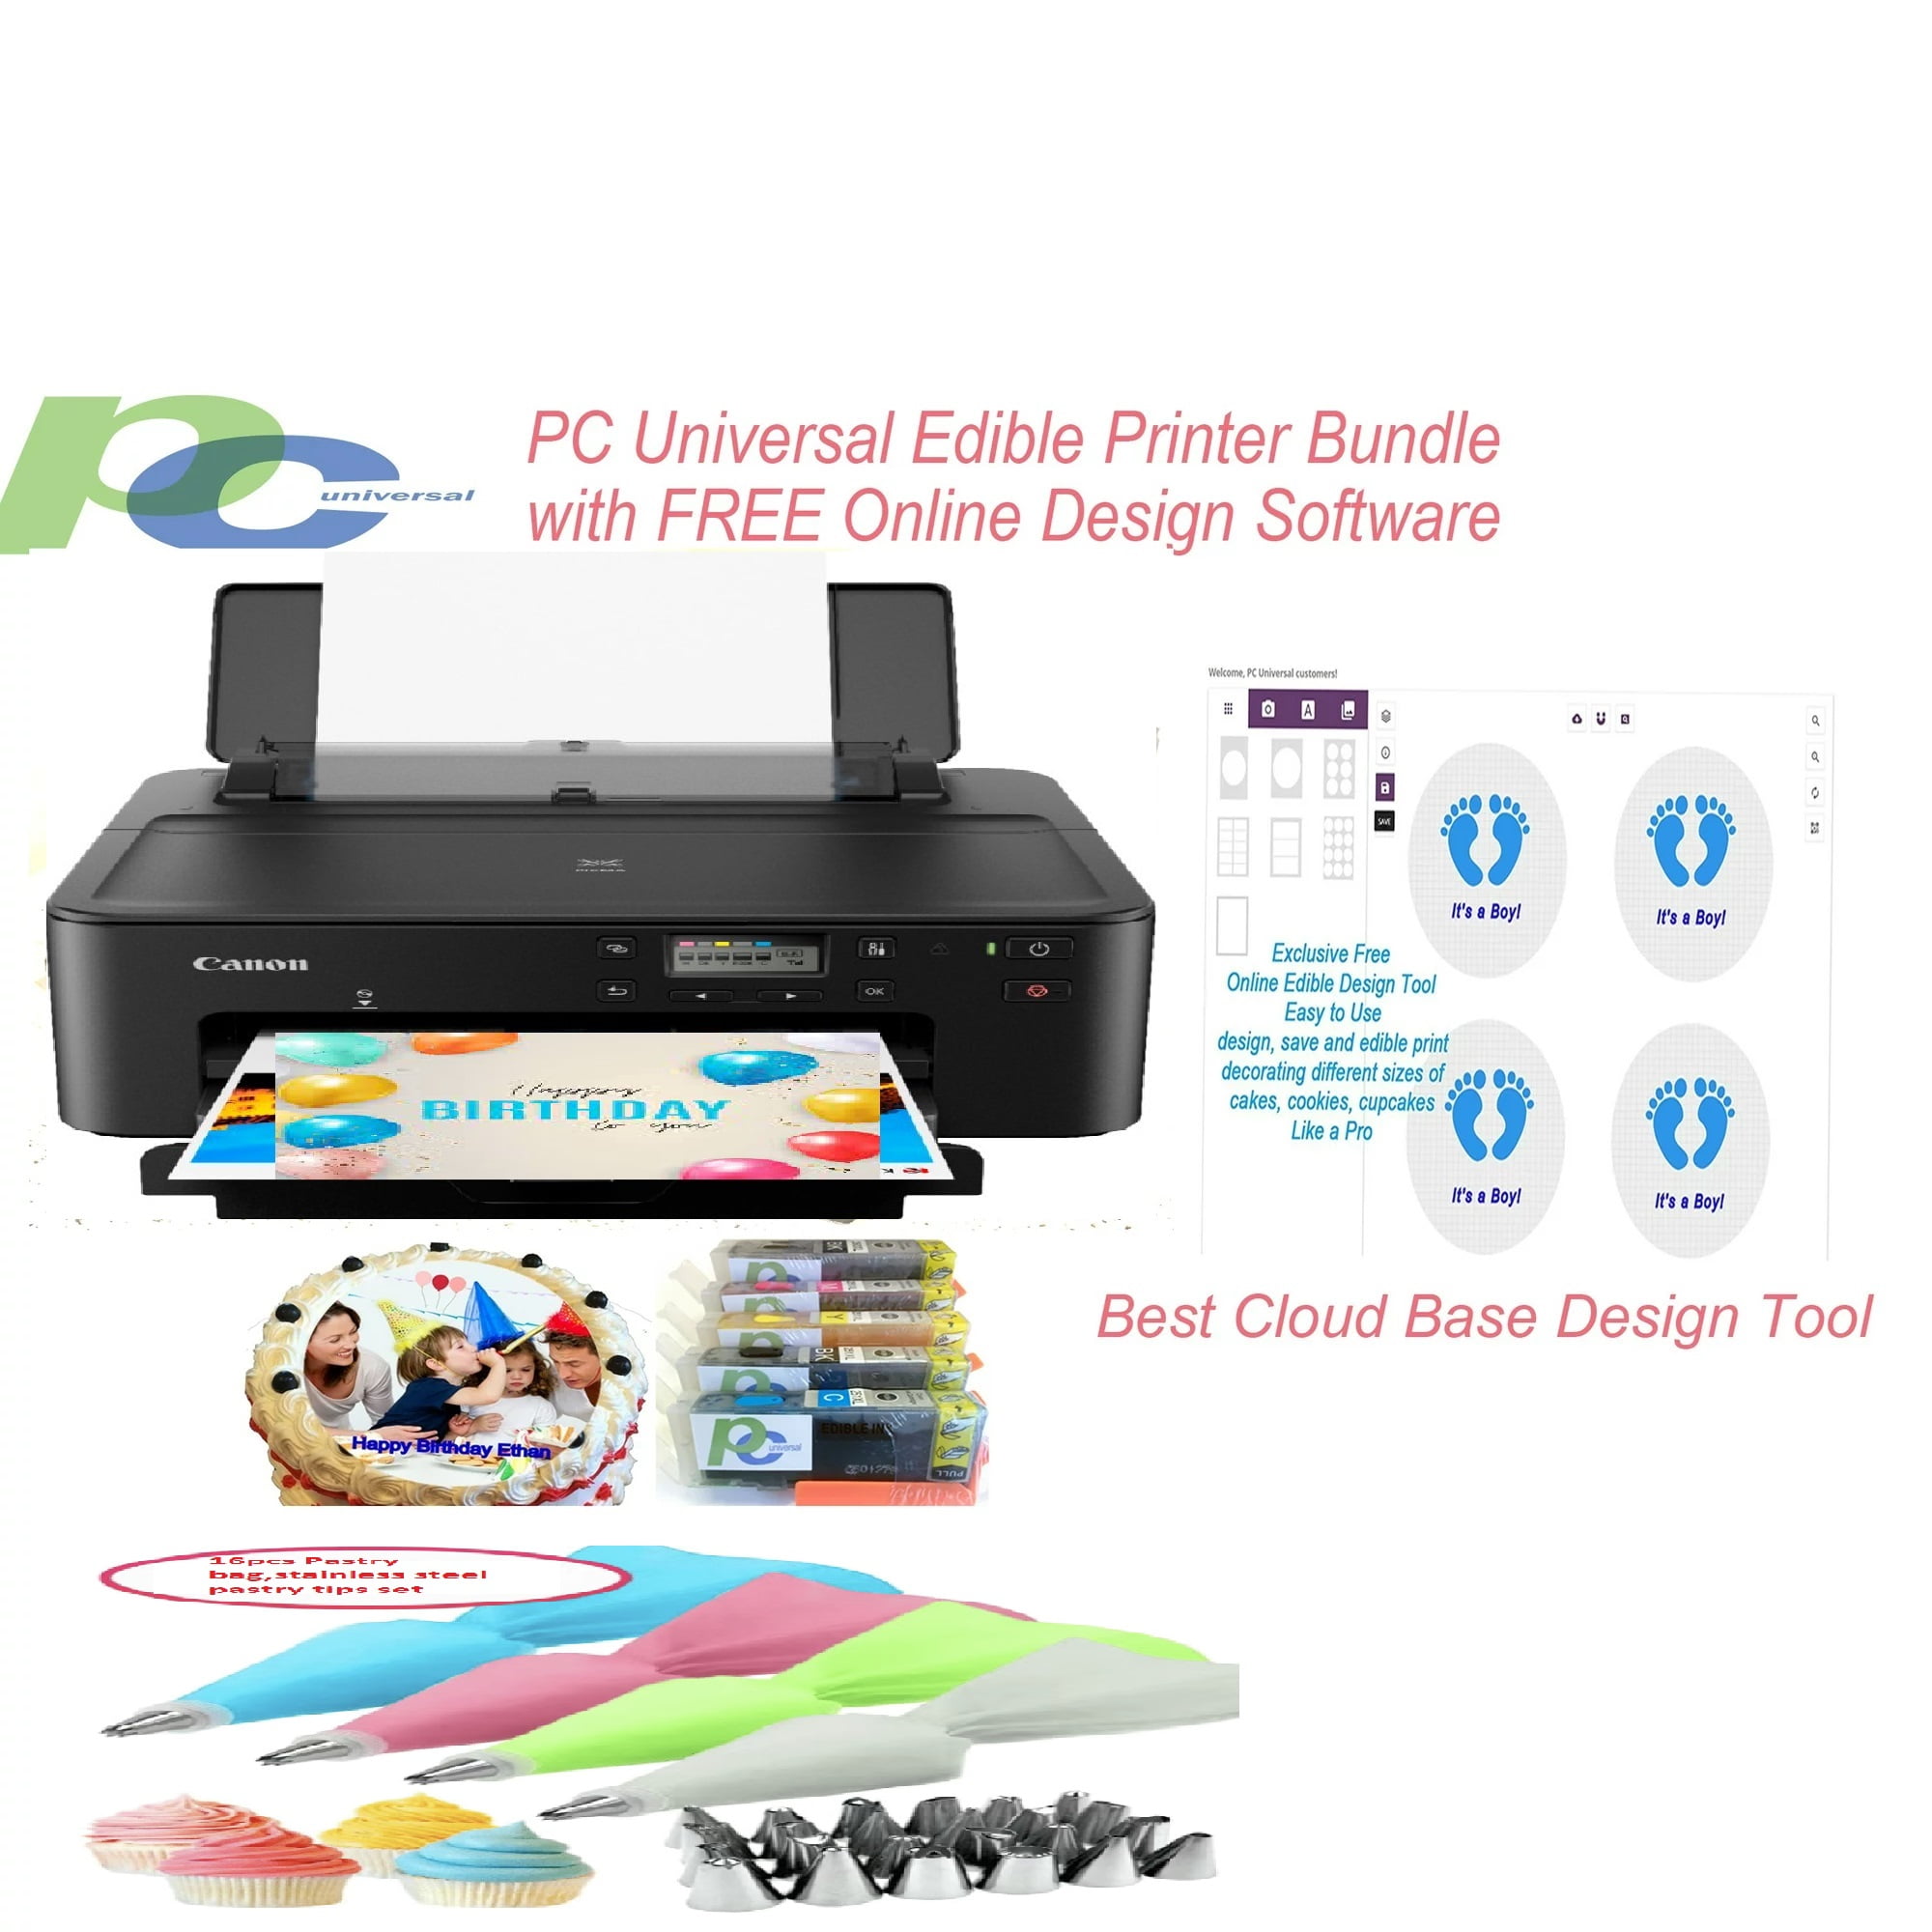 PC Universal Edible Printer Bundle- New wireless Printer with Edible Paper.  Ink & 16 pcs Pastry bag, stainless steel pastry tips set